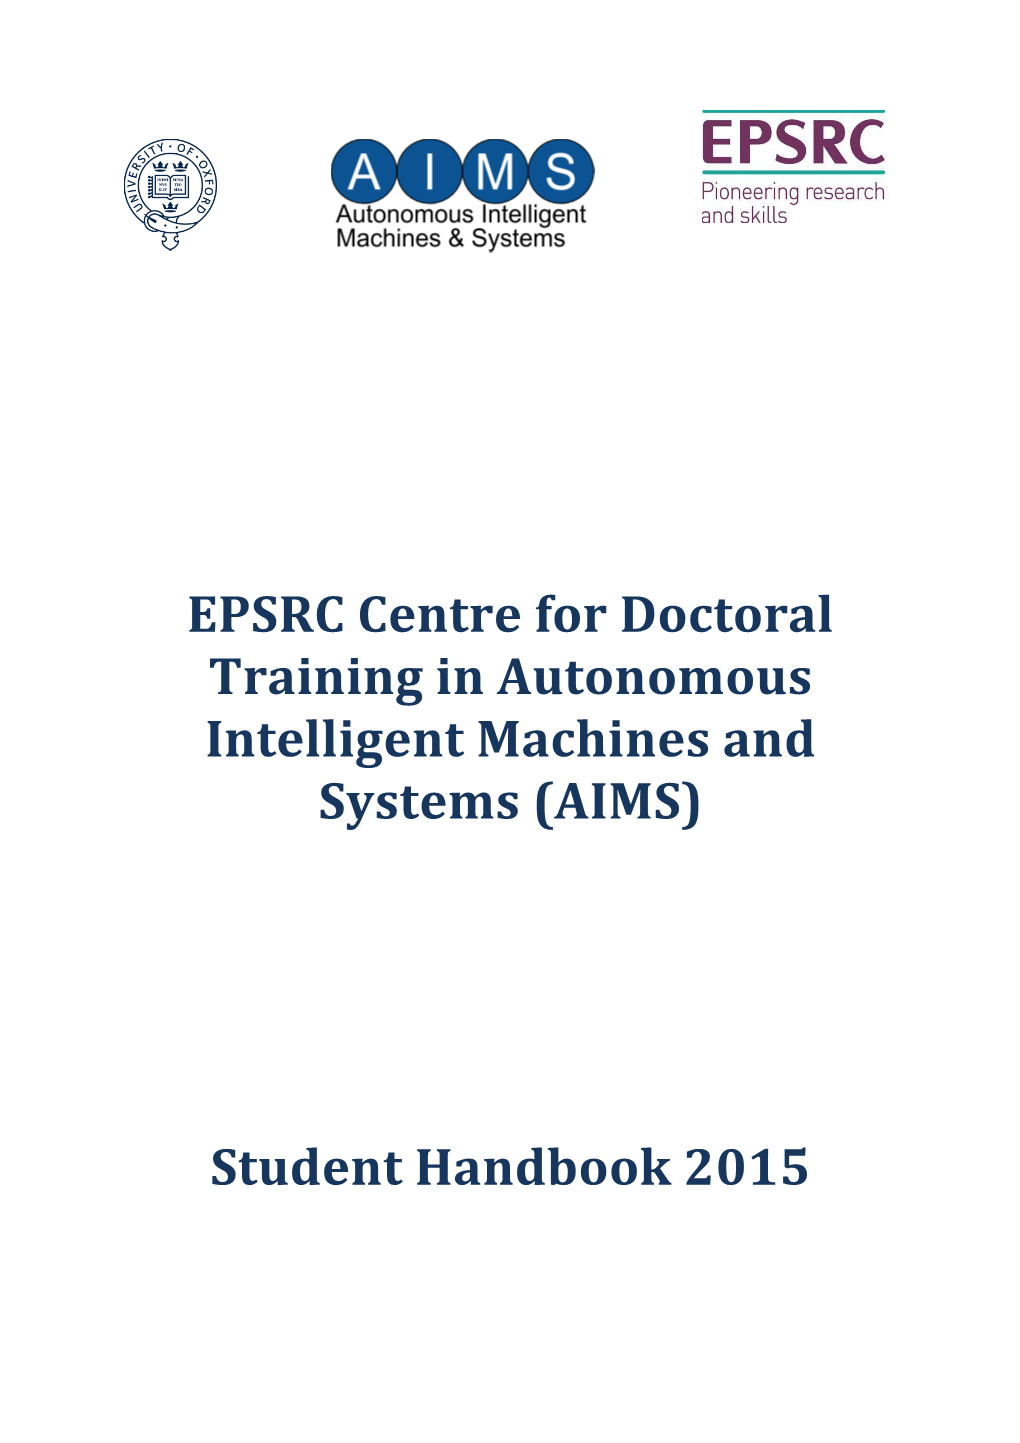 EPSRC Centre for Doctoral Training in Autonomous Intelligent Machines and Systems (AIMS)